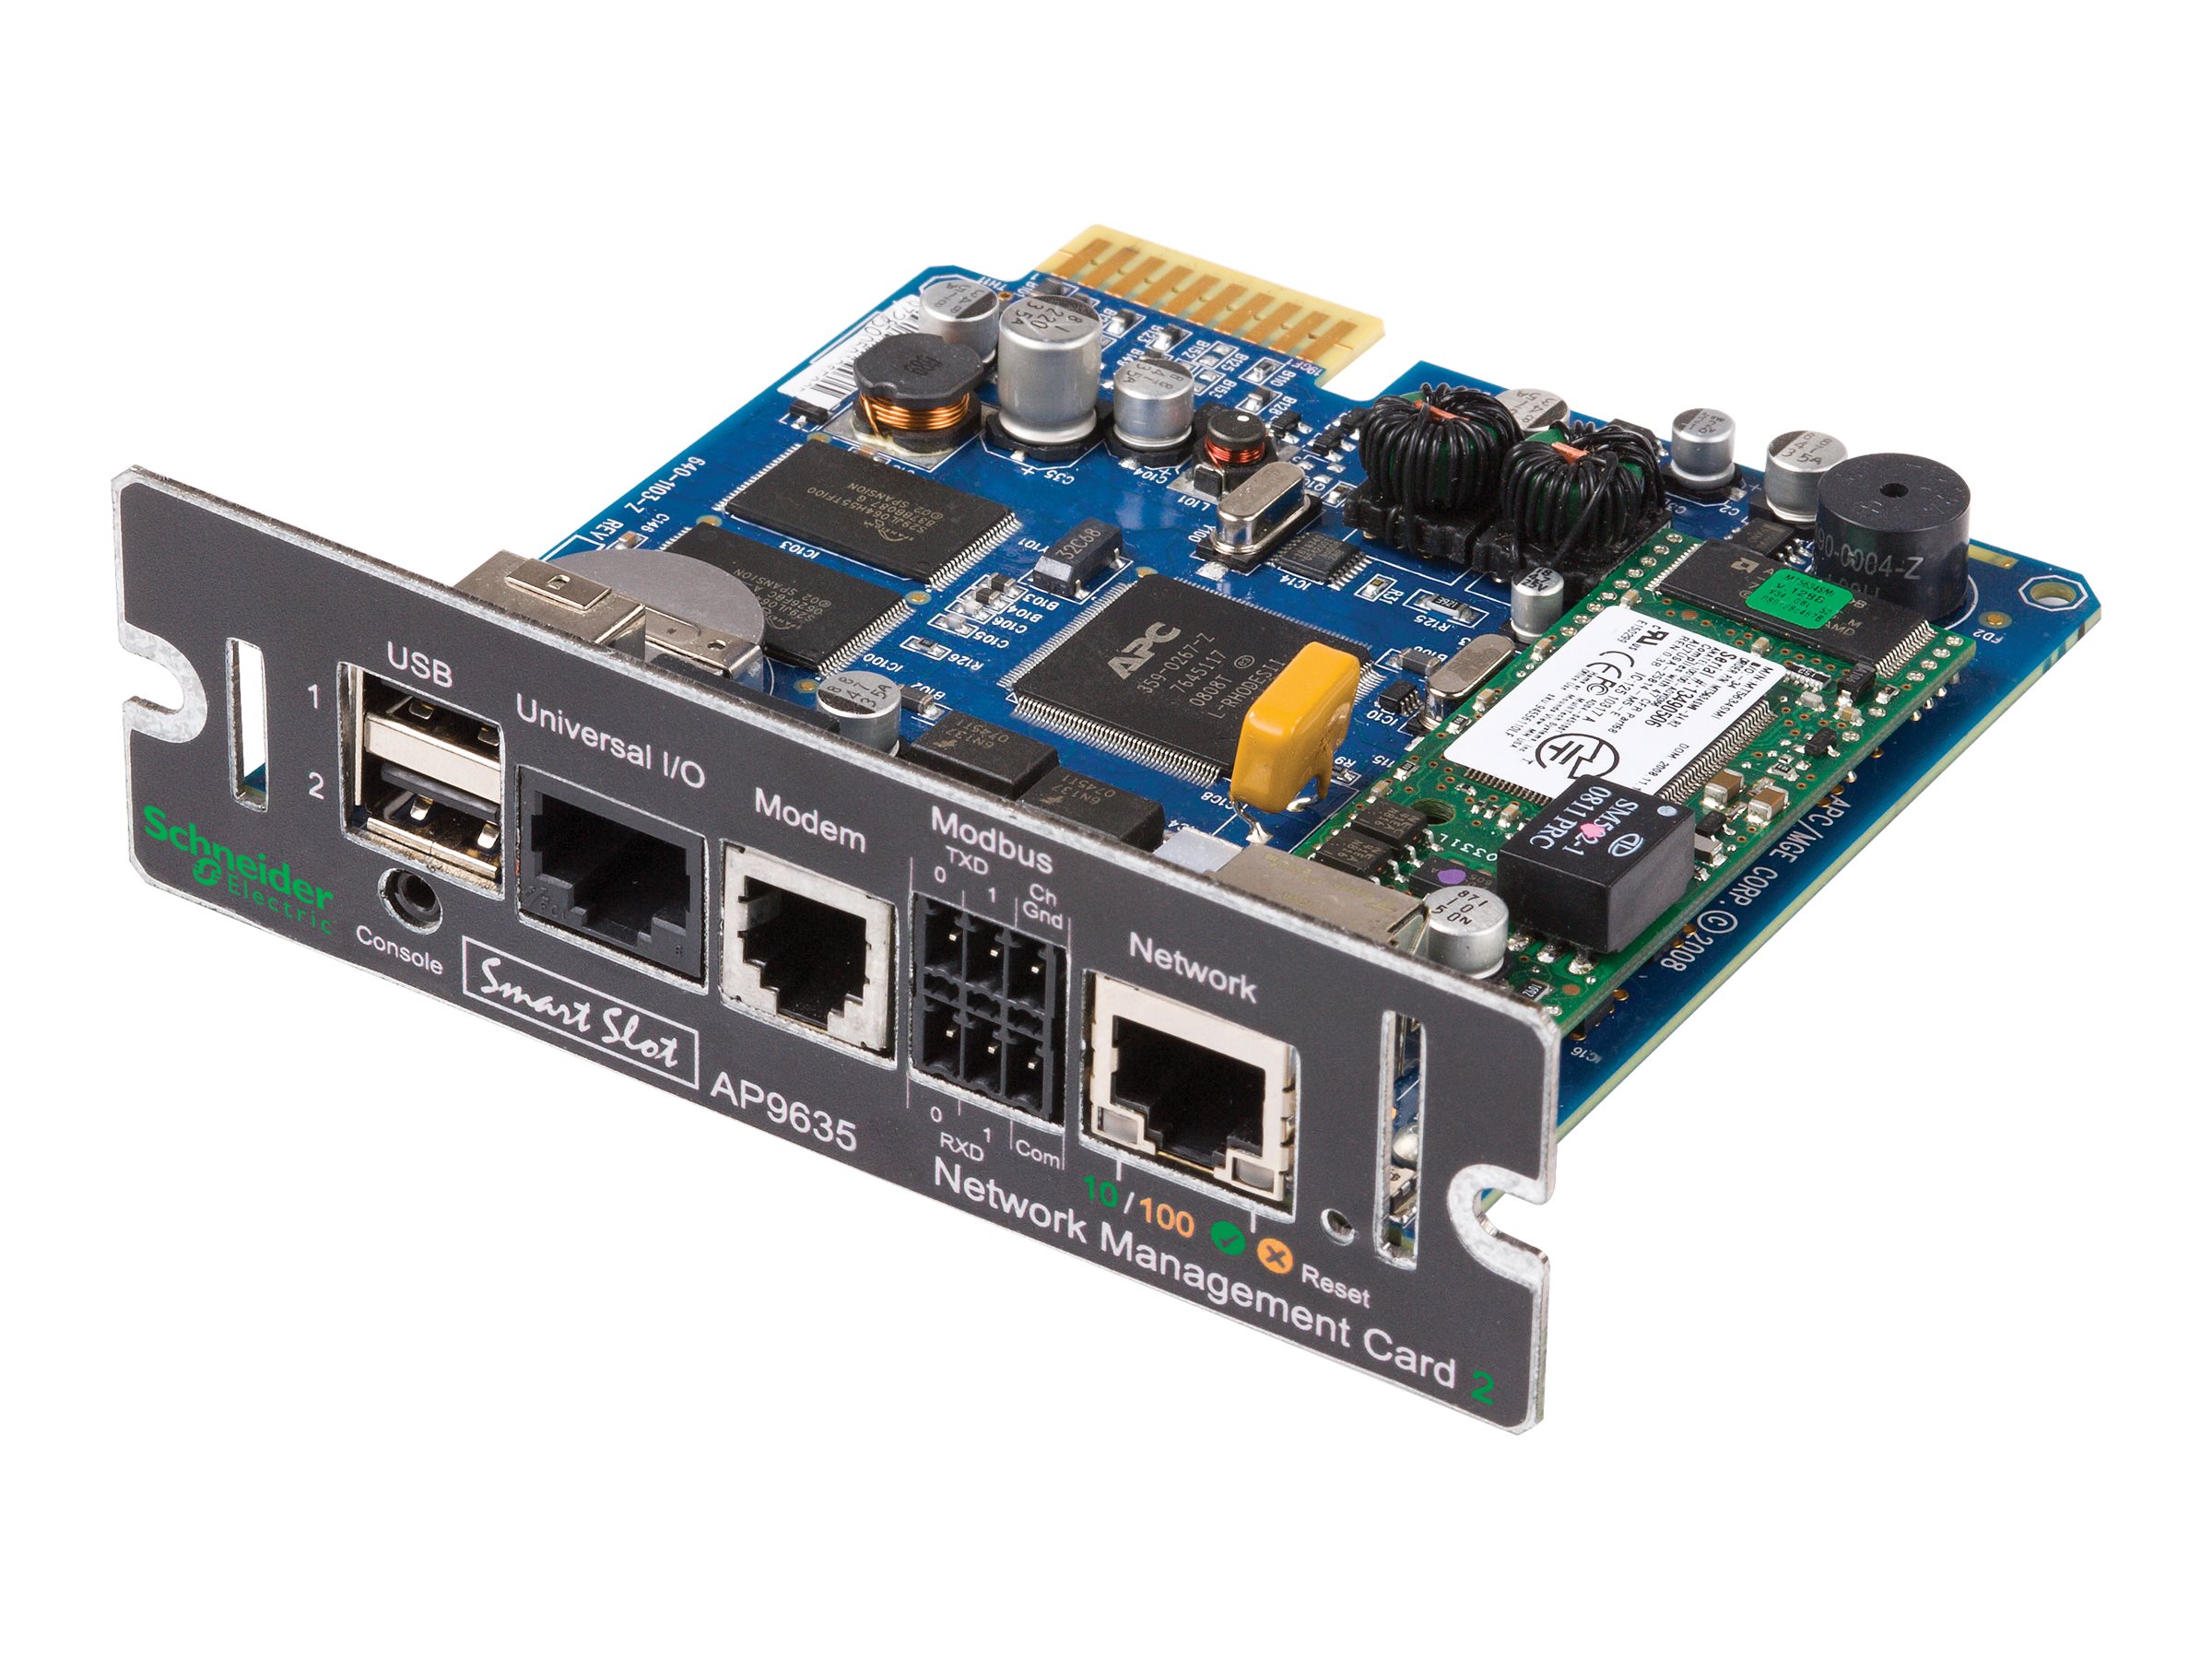 APC Network Management Card 2 with Environmental Monitoring, Out of Band Management and Modbus - Fernverwaltungsadapter - SmartSlot - 10/100 Ethernet - für P/N: GVX500K1250GS, GVX500K1500GS, GVX750K1250GS, GVX750K1500GS, GVX750K1500HS